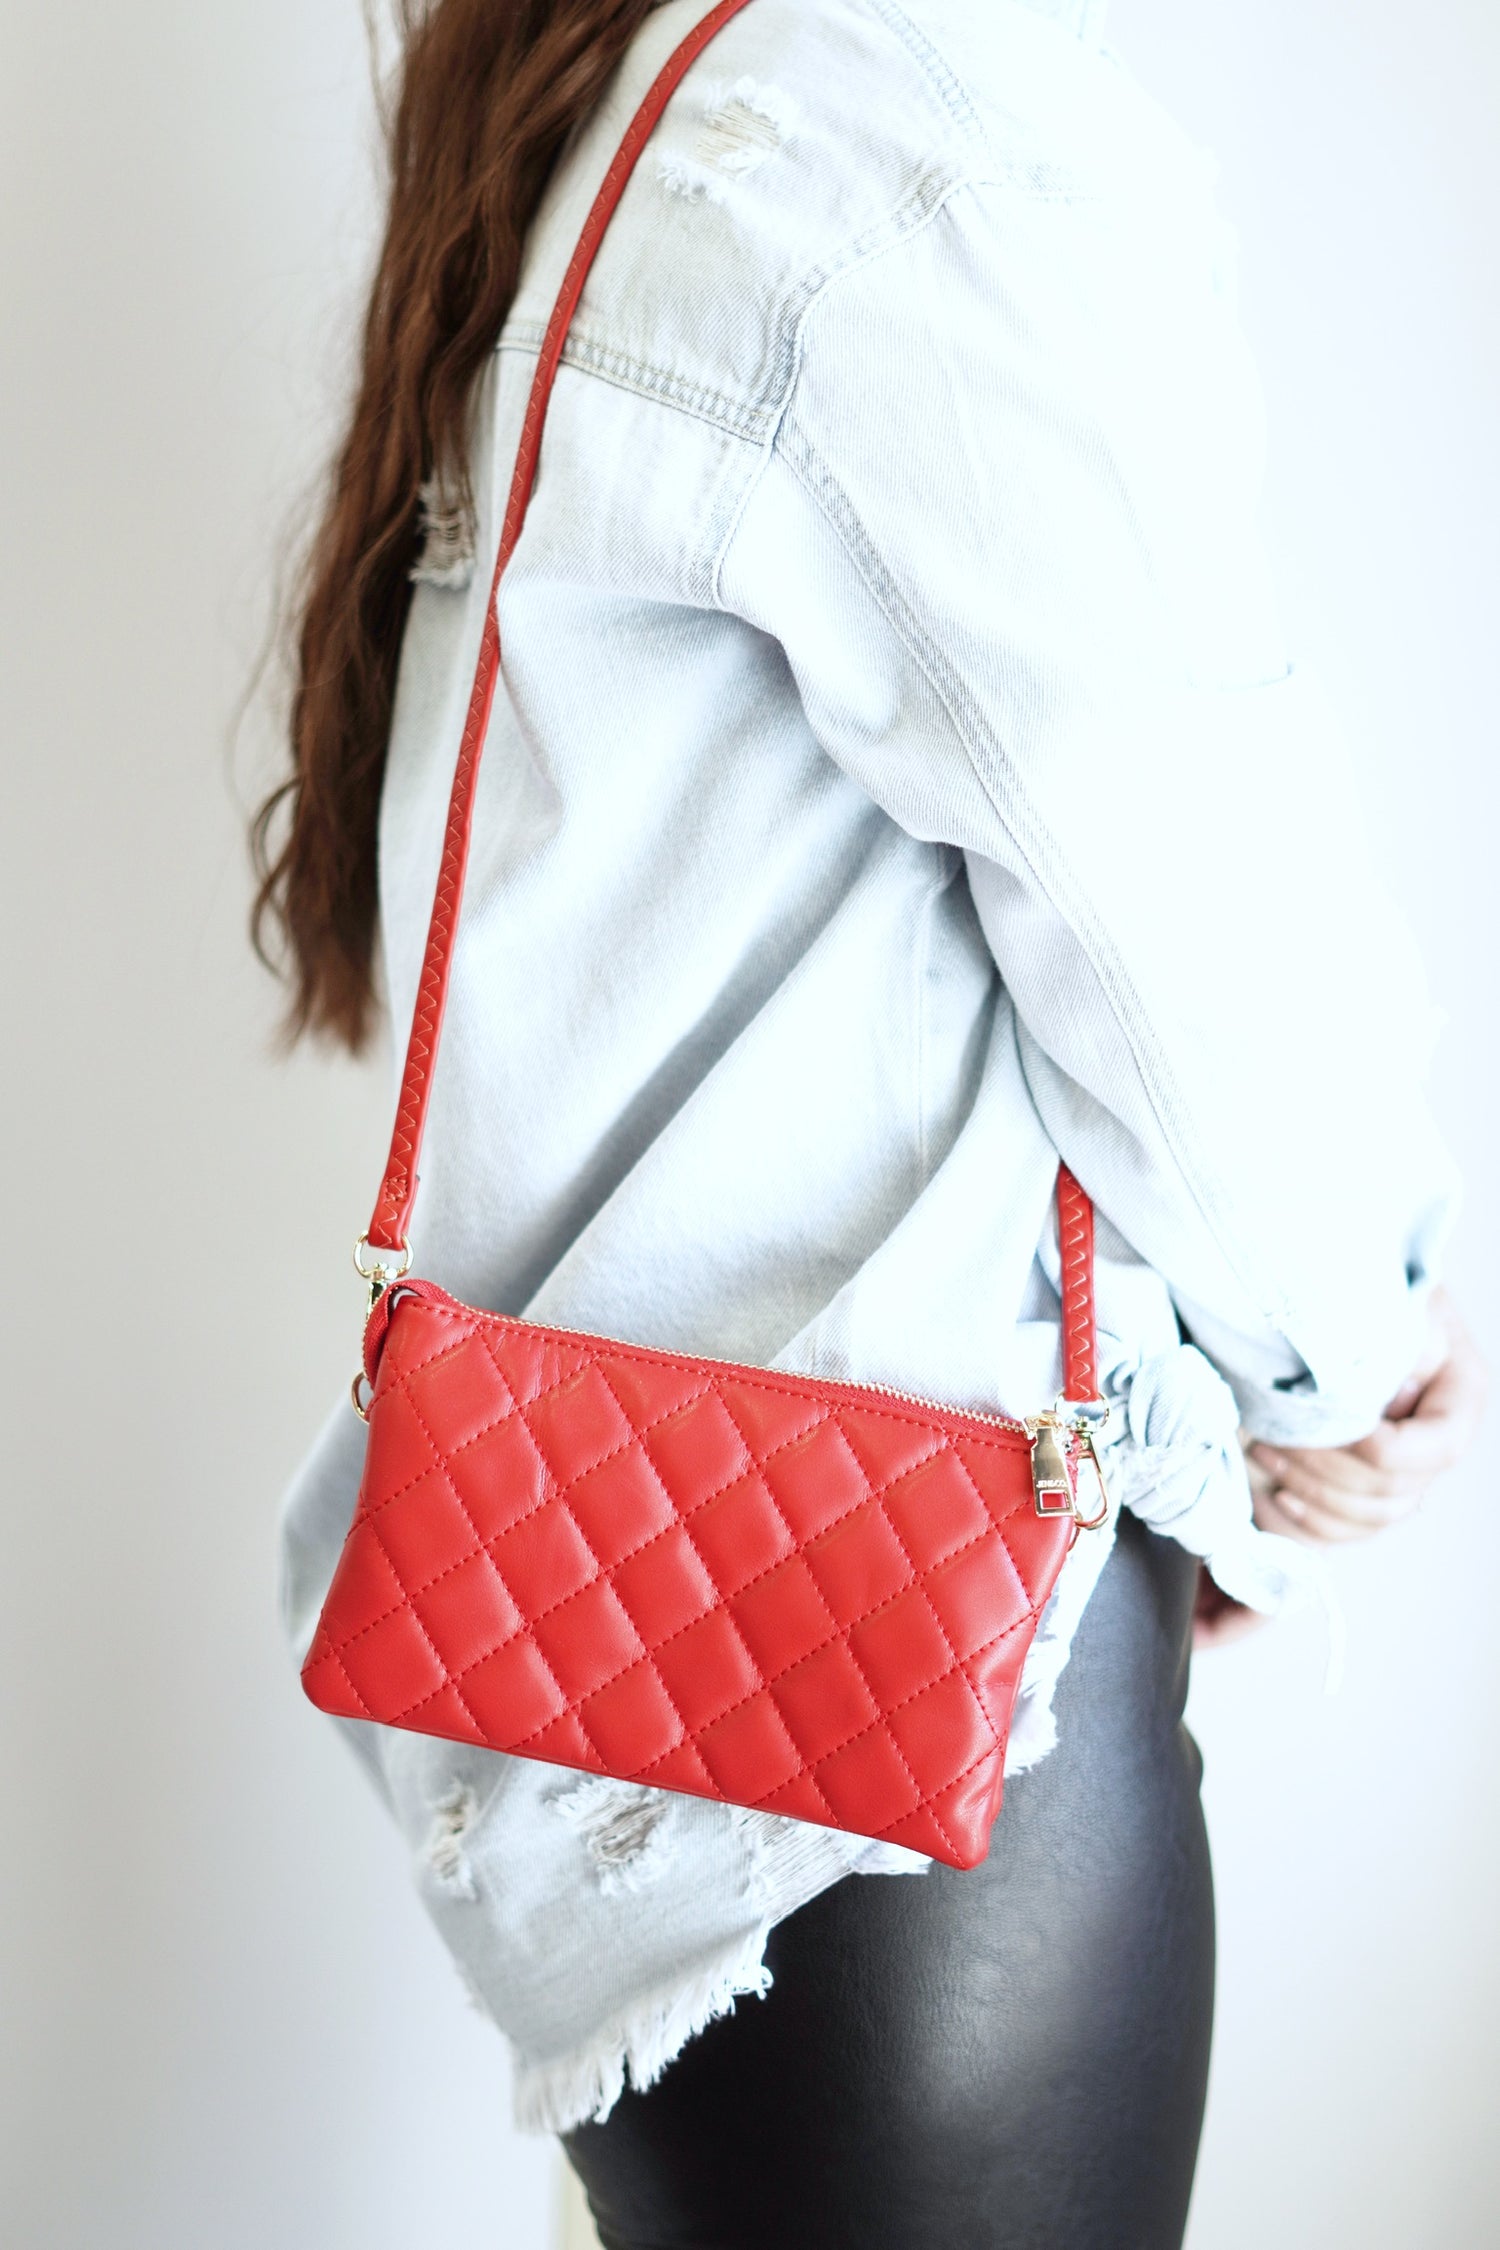 Riley Quilted Crossbody Wallet 5 Compartments 6 Card Slots  1 Interior Zipper  Zipper Closer   Colors: Red One Crossbody Strap, One Wristlet Strap - Both Removable 8.5 x 5.5in